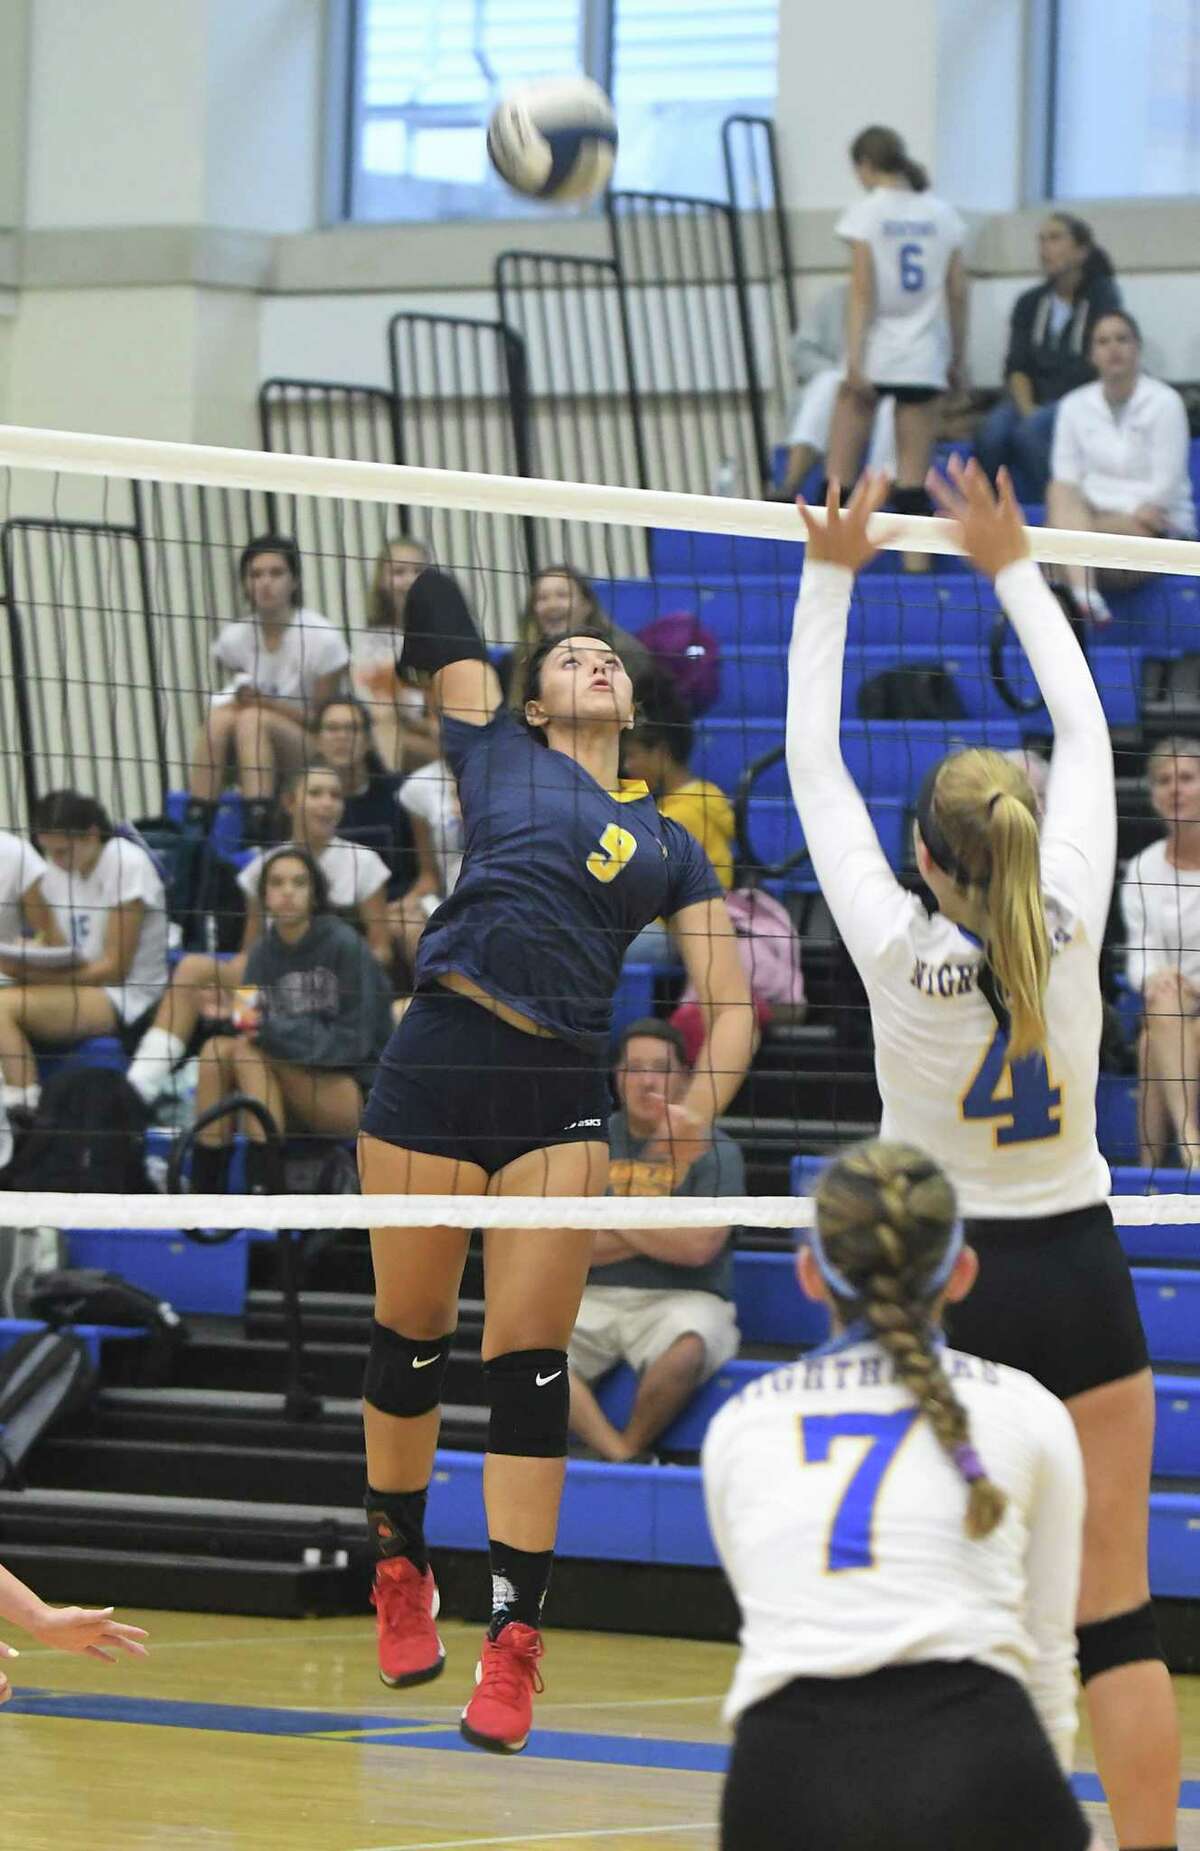 Woodstock Academy’s Paula Hernandez (9) during the Woodstock Academy at Newtown High School girls volleyball game, Sept. 17, 2018.